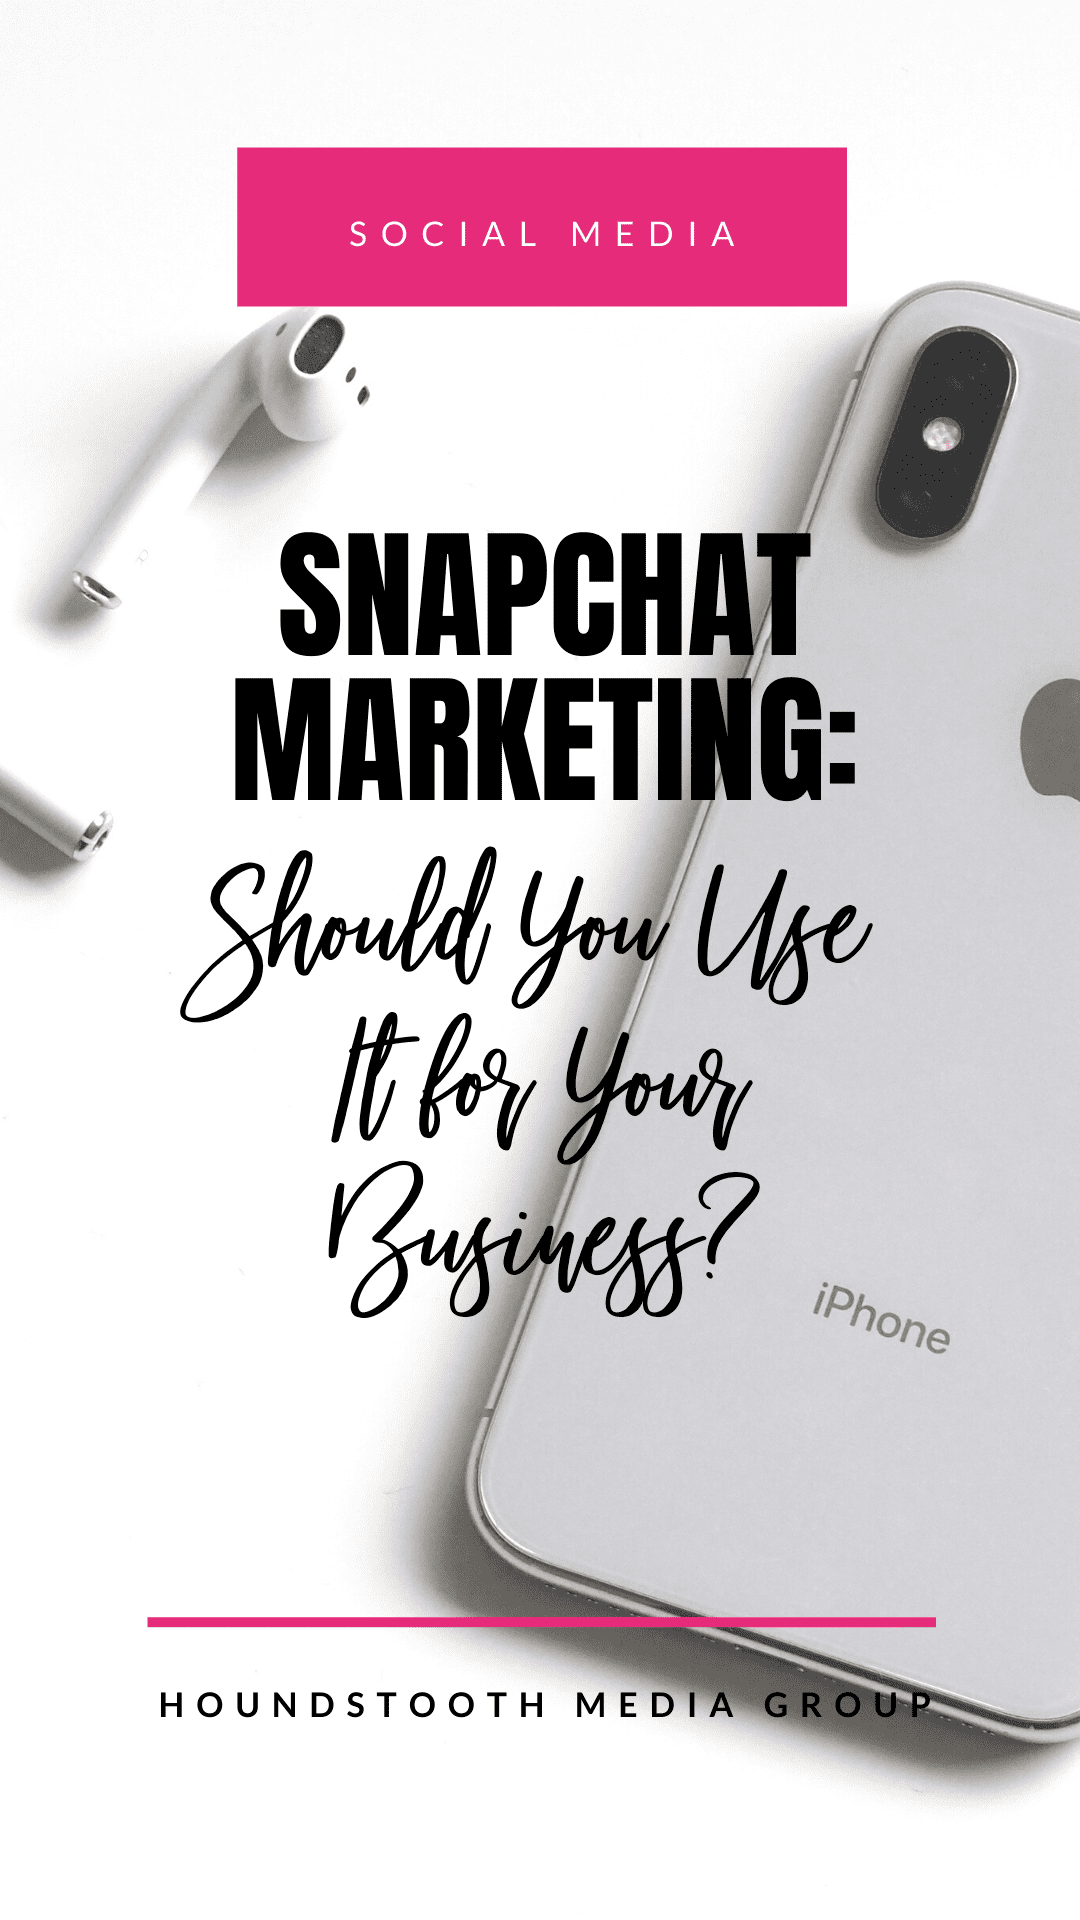 Snapchat Marketing: Should You Use it for Your Business?